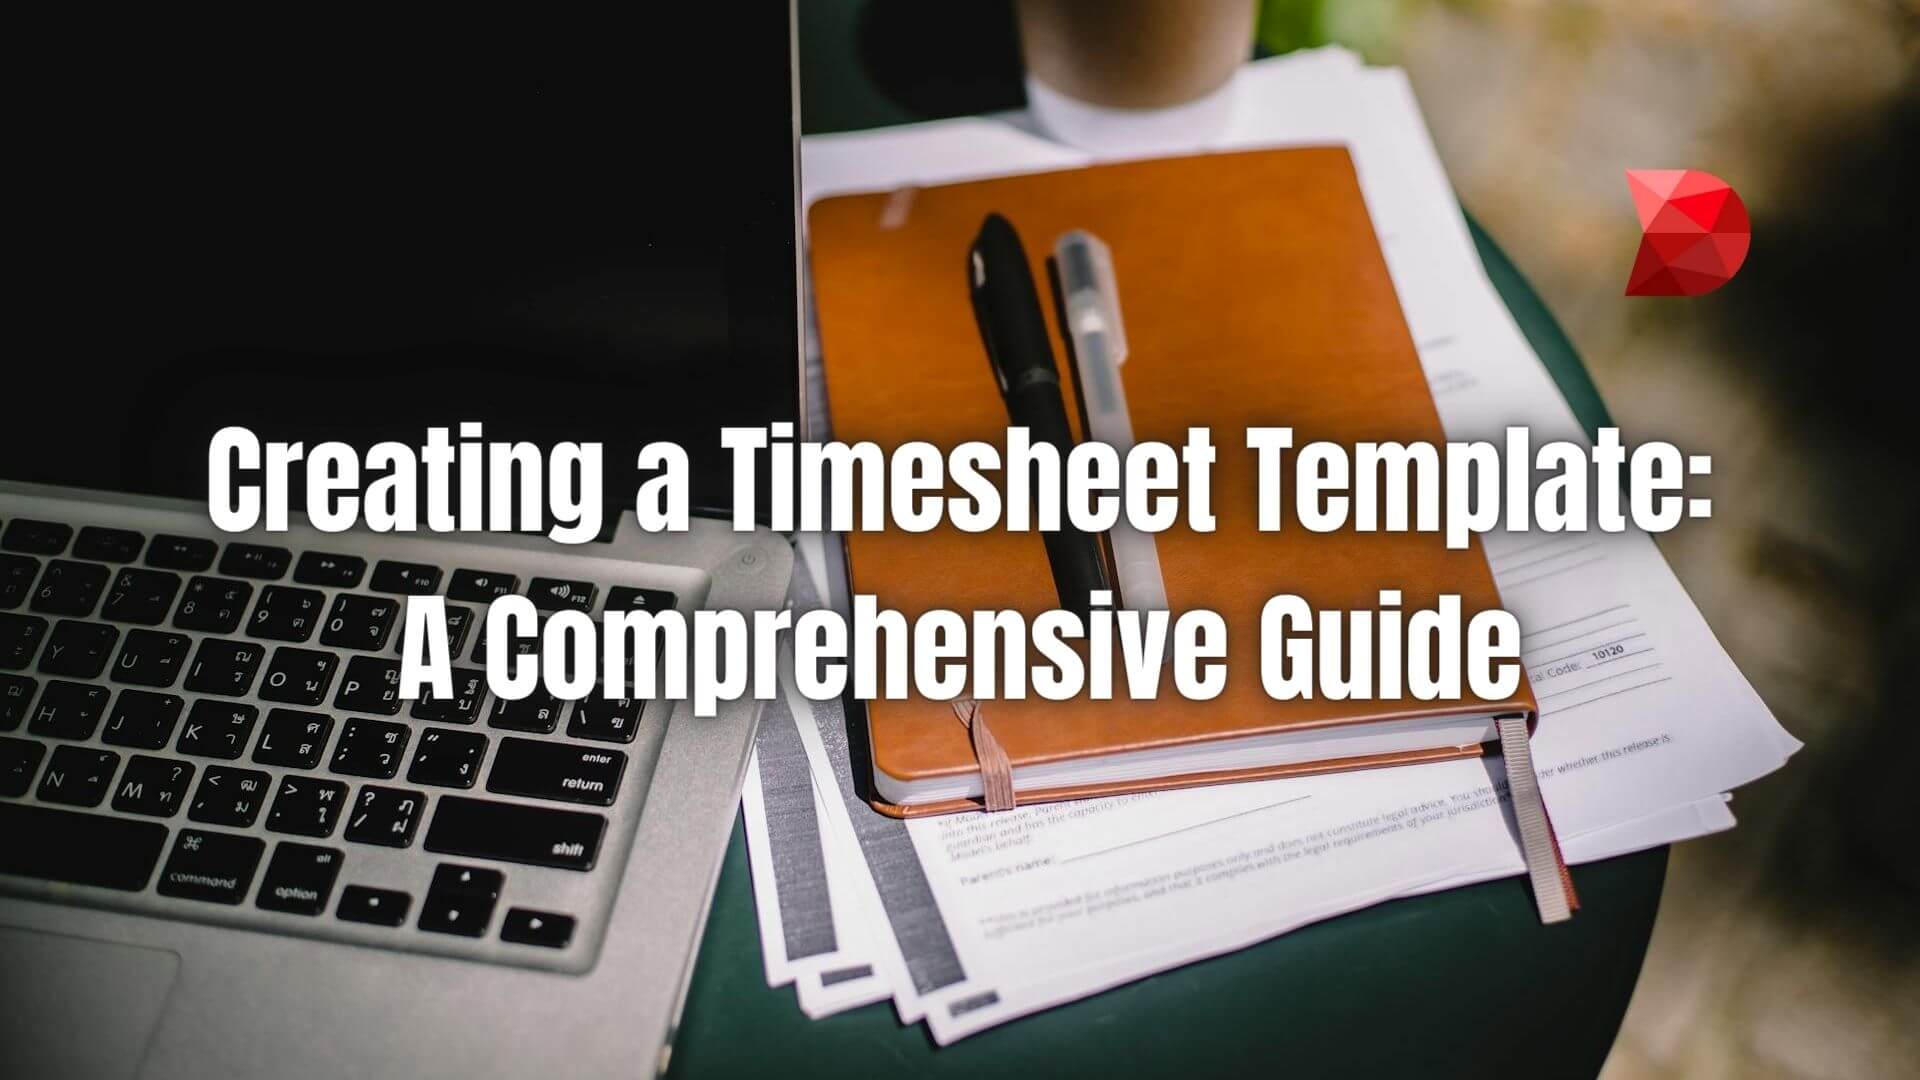 Streamline your time management process effortlessly! Unlock efficiency with our comprehensive guide to creating a timesheet template.